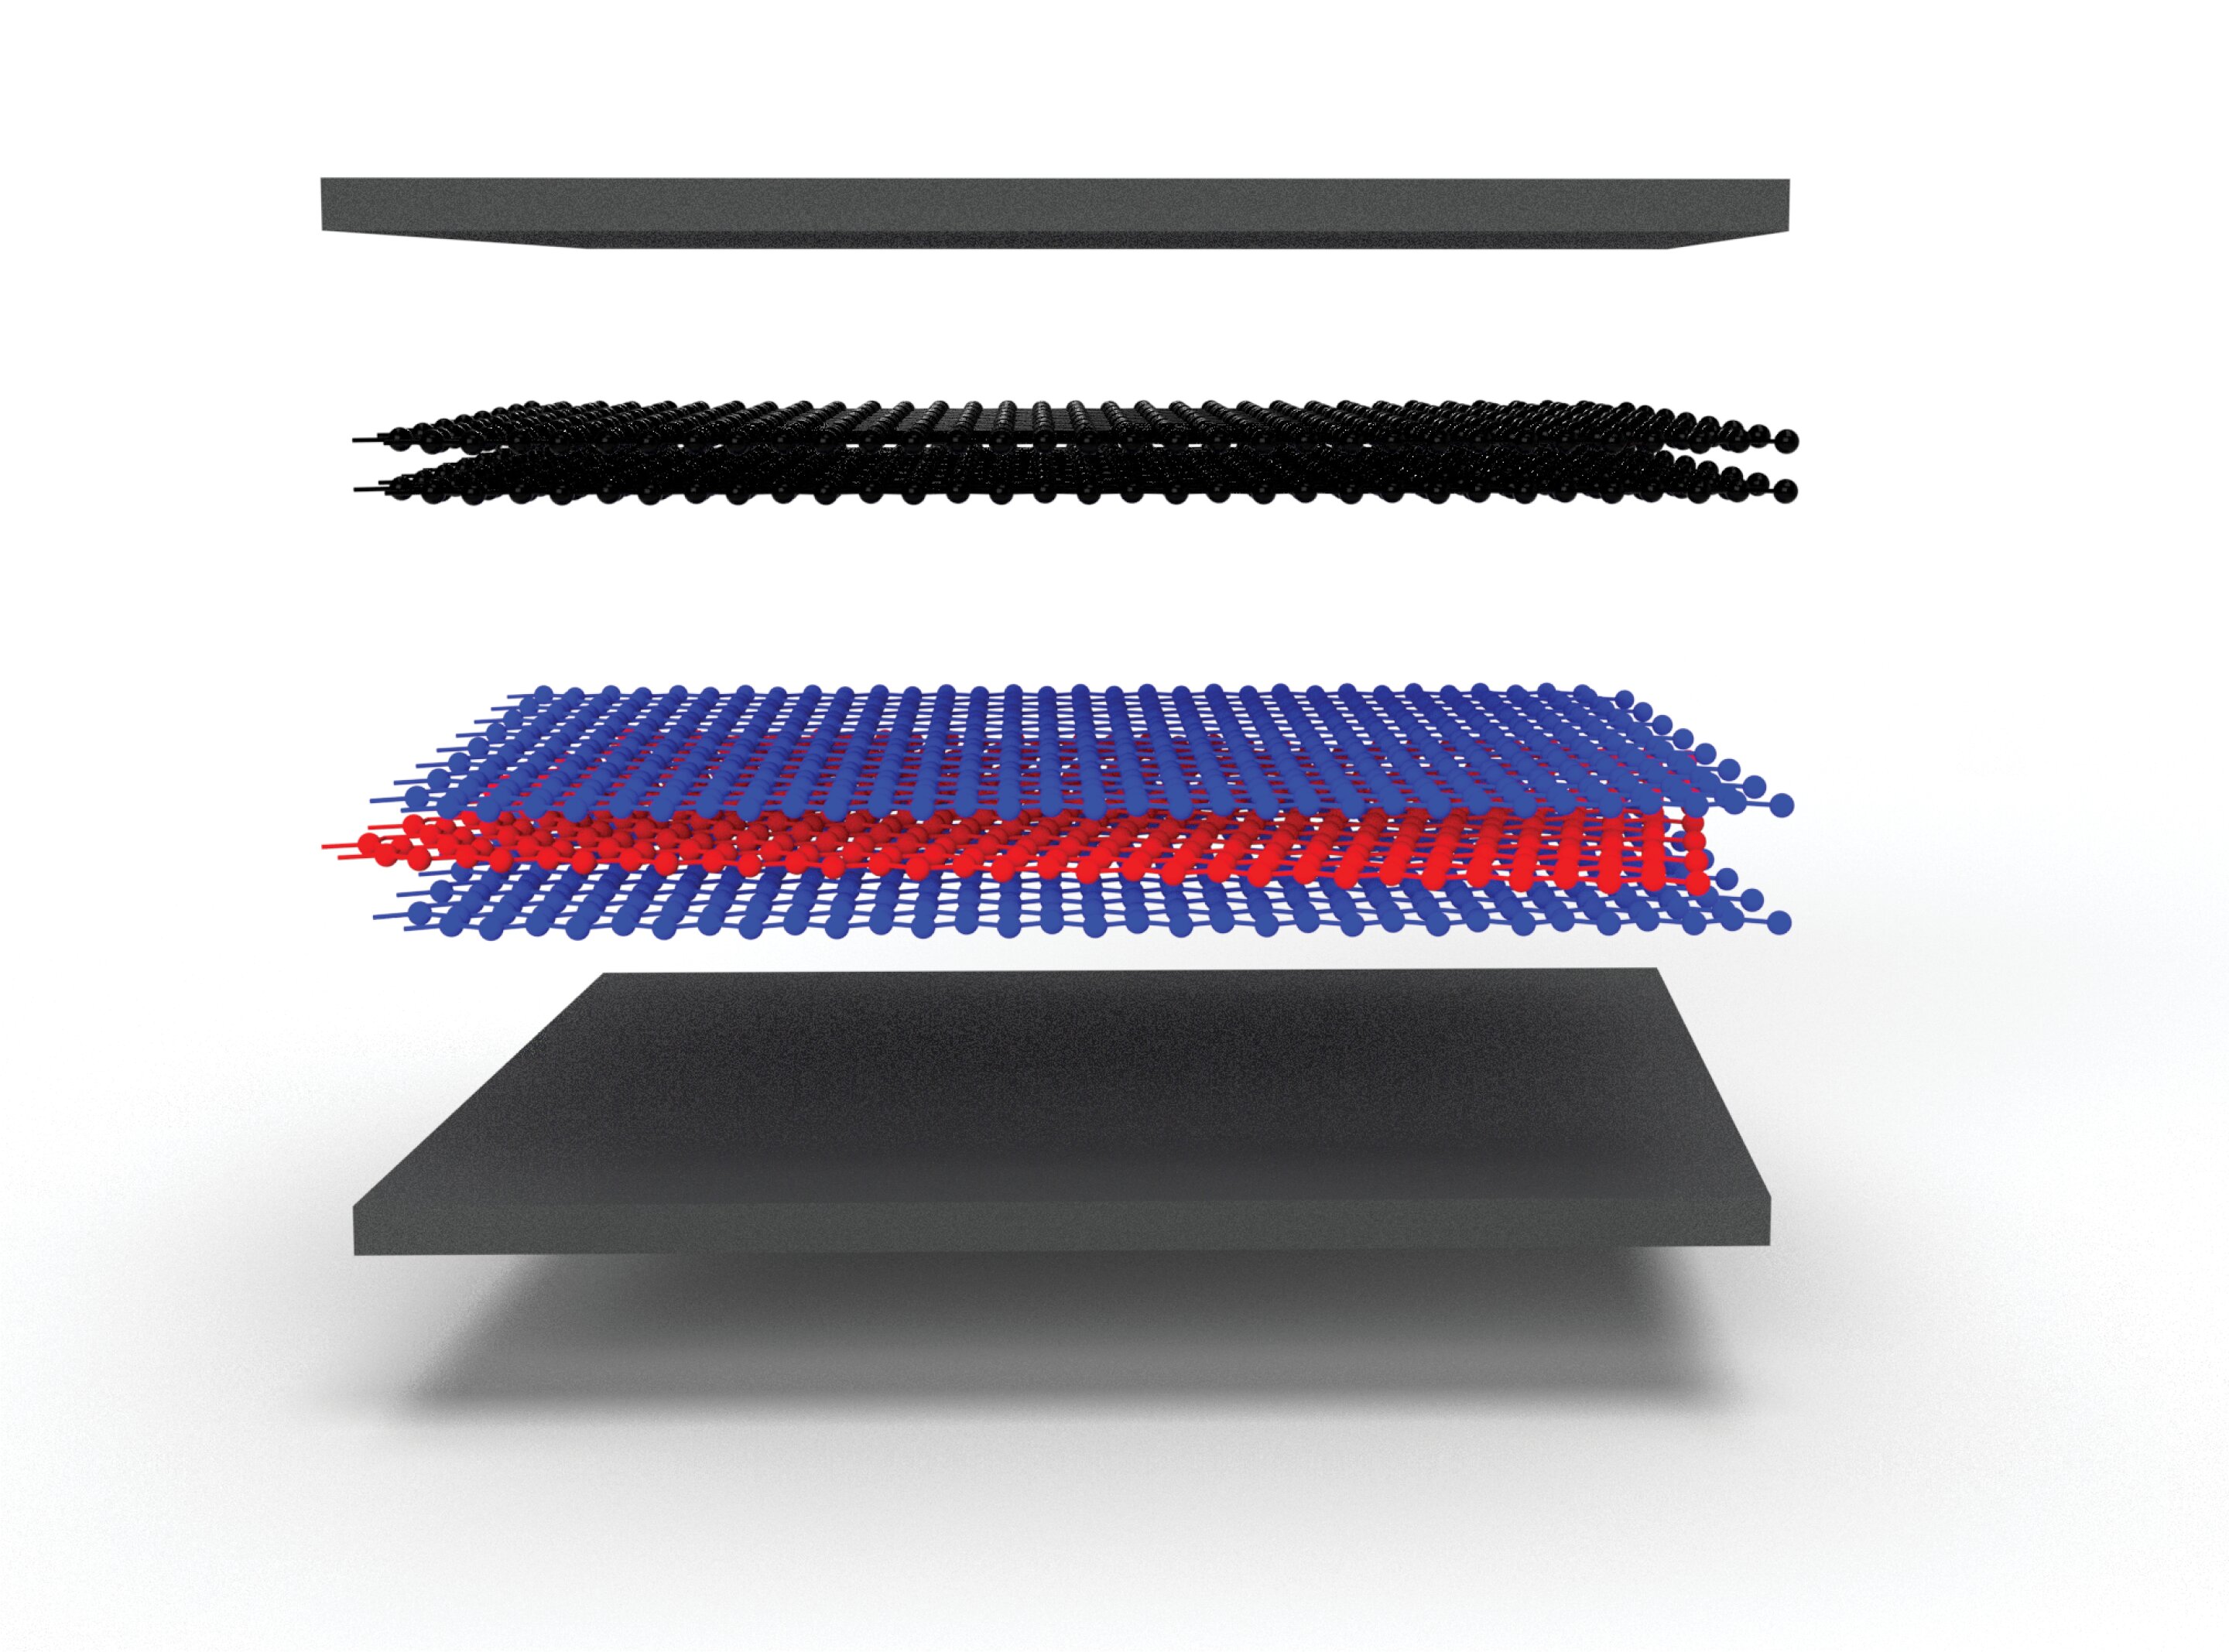 Study improves the understanding of superconductivity in magic-angle twisted tri..